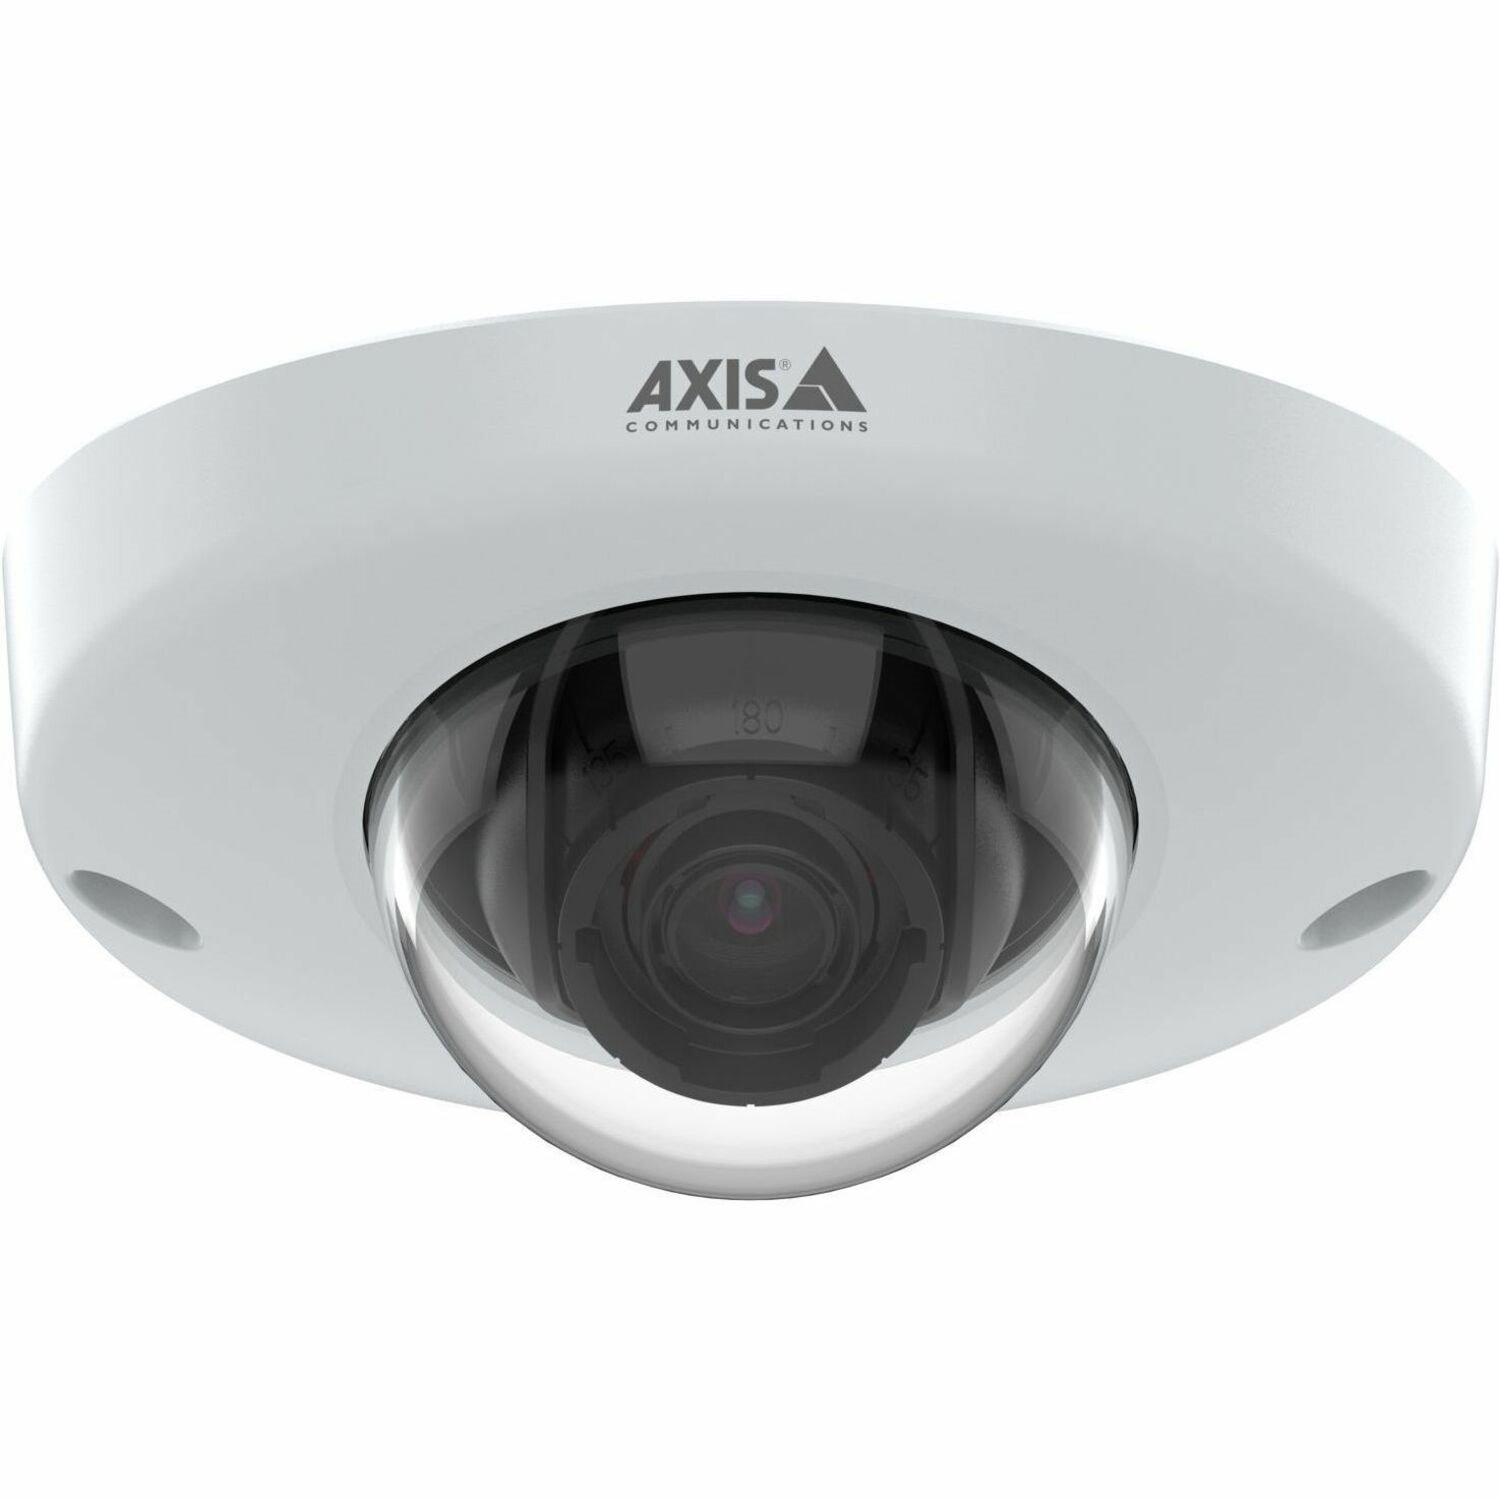 AXIS M3905-R M12 2 Megapixel Full HD Network Camera - Colour - 10 Pack - Dome - White - TAA Compliant